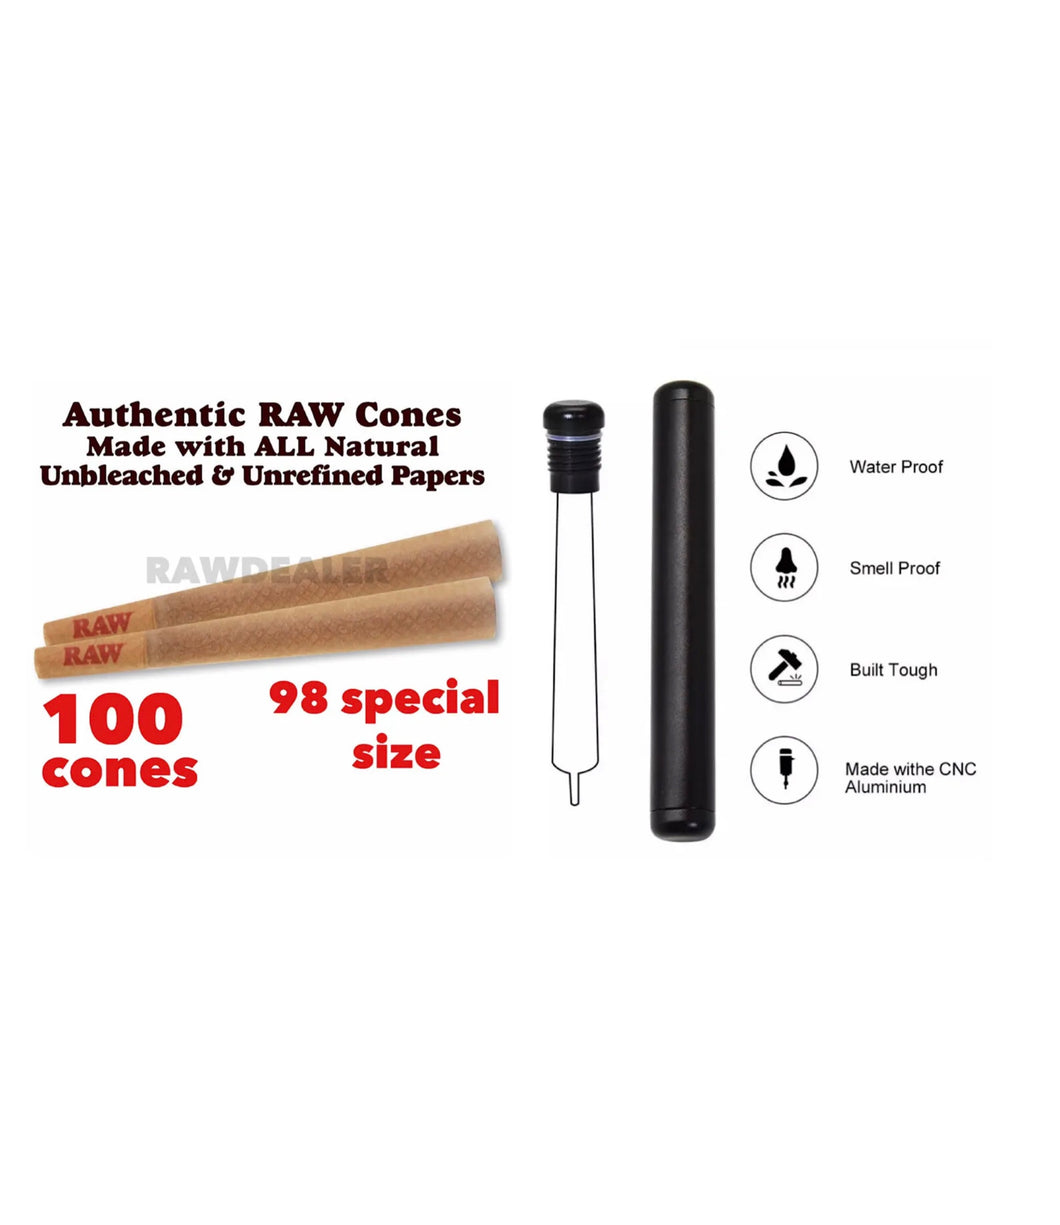 Raw classic 98 special size Cone(100 Packs)+ALUMINUM doob tube joint